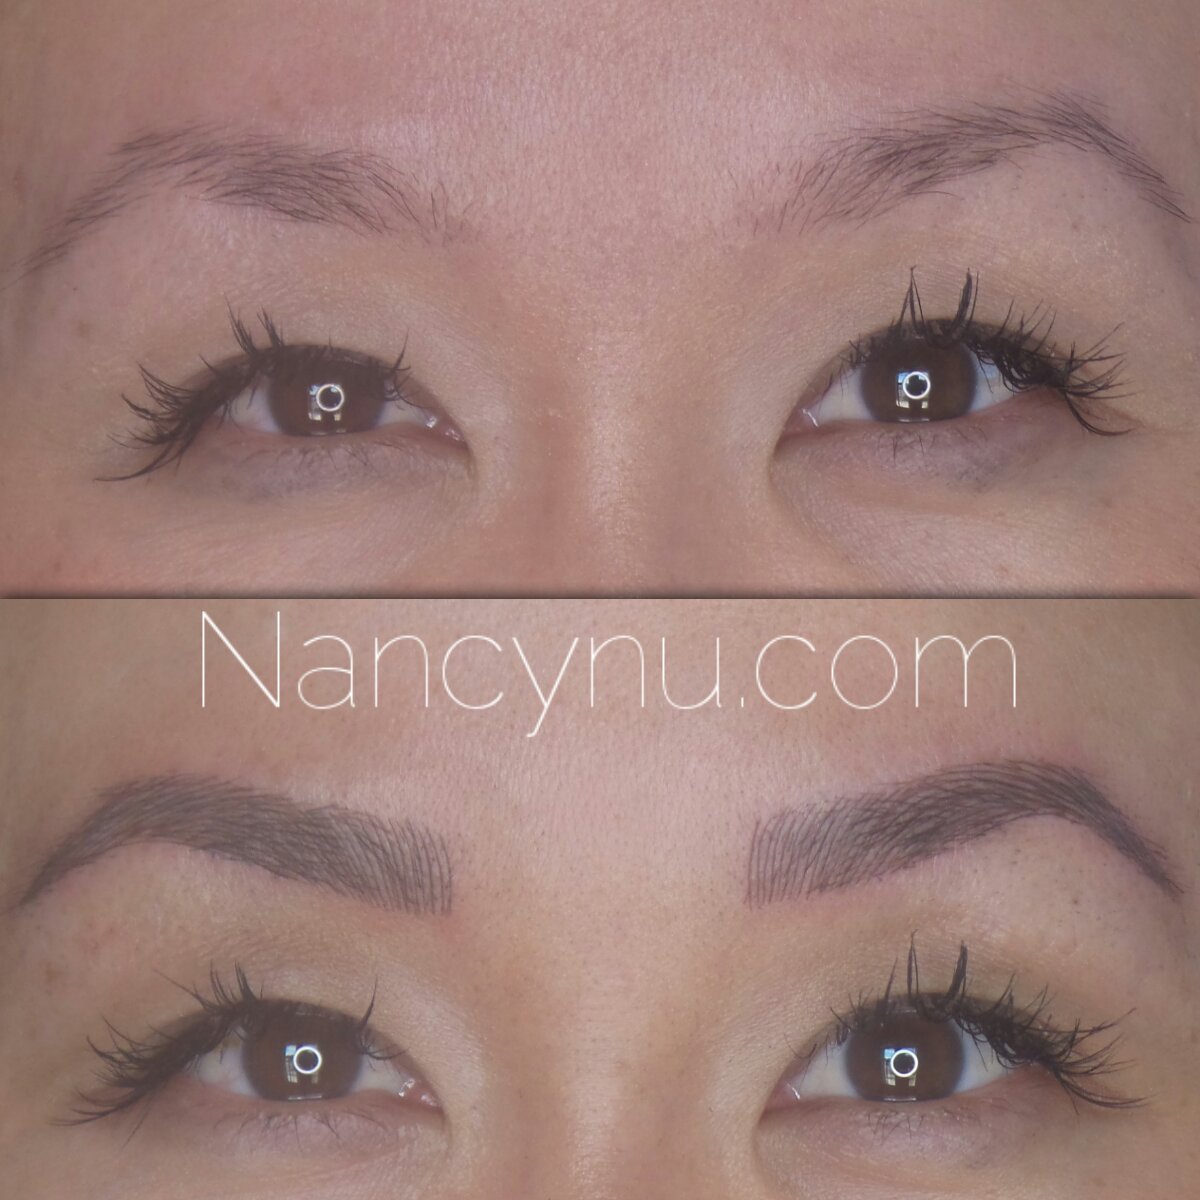 3D Embroidery / Microblading eyebrows - before and after, lasts for a year and a half, semi permanent.